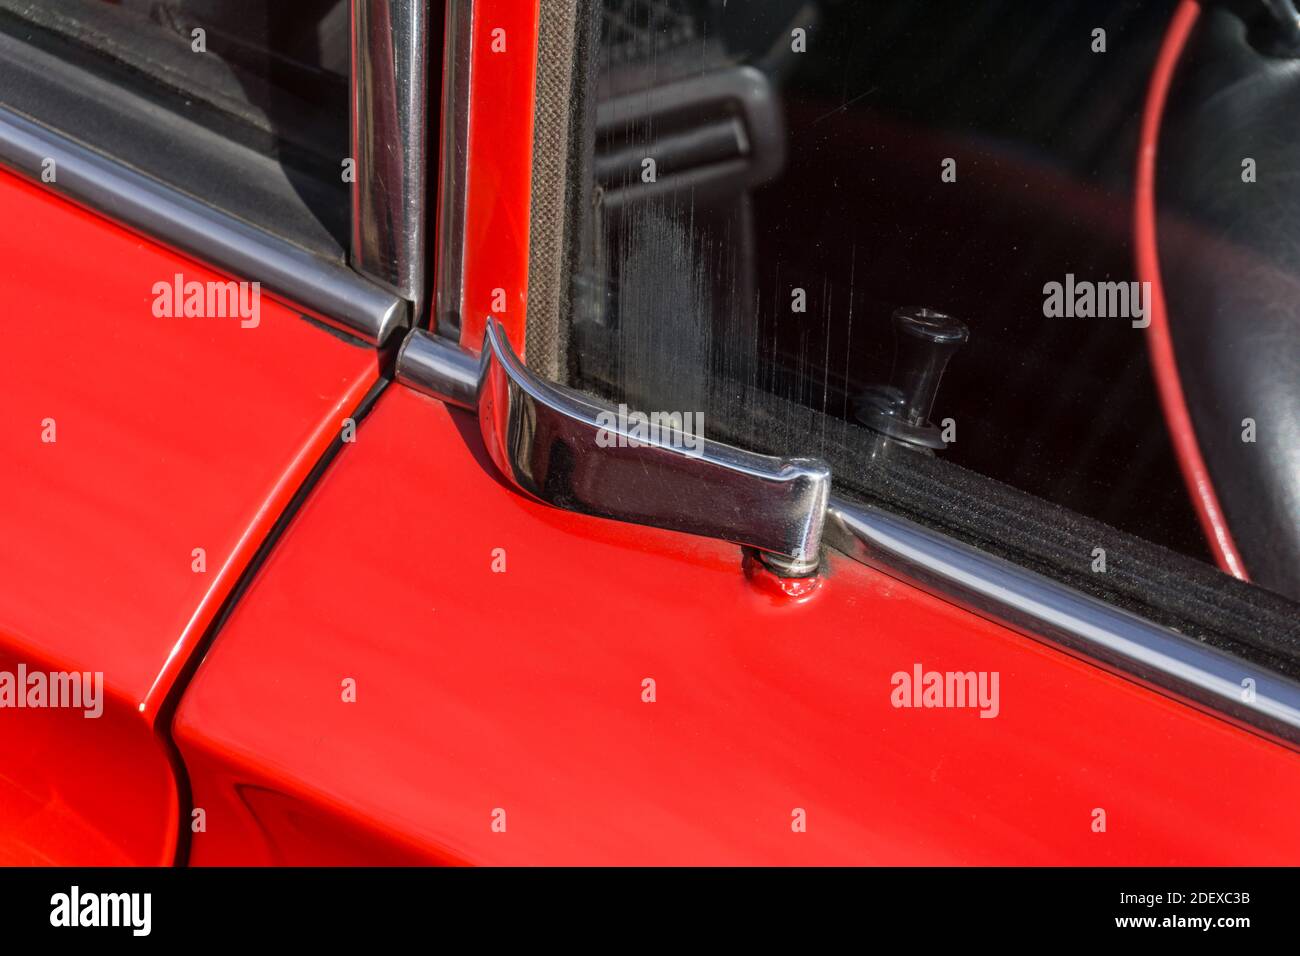 Close up detail of the chrome door latch handle on a red 1970s Ferrari Dino 246 GT sports car Stock Photo